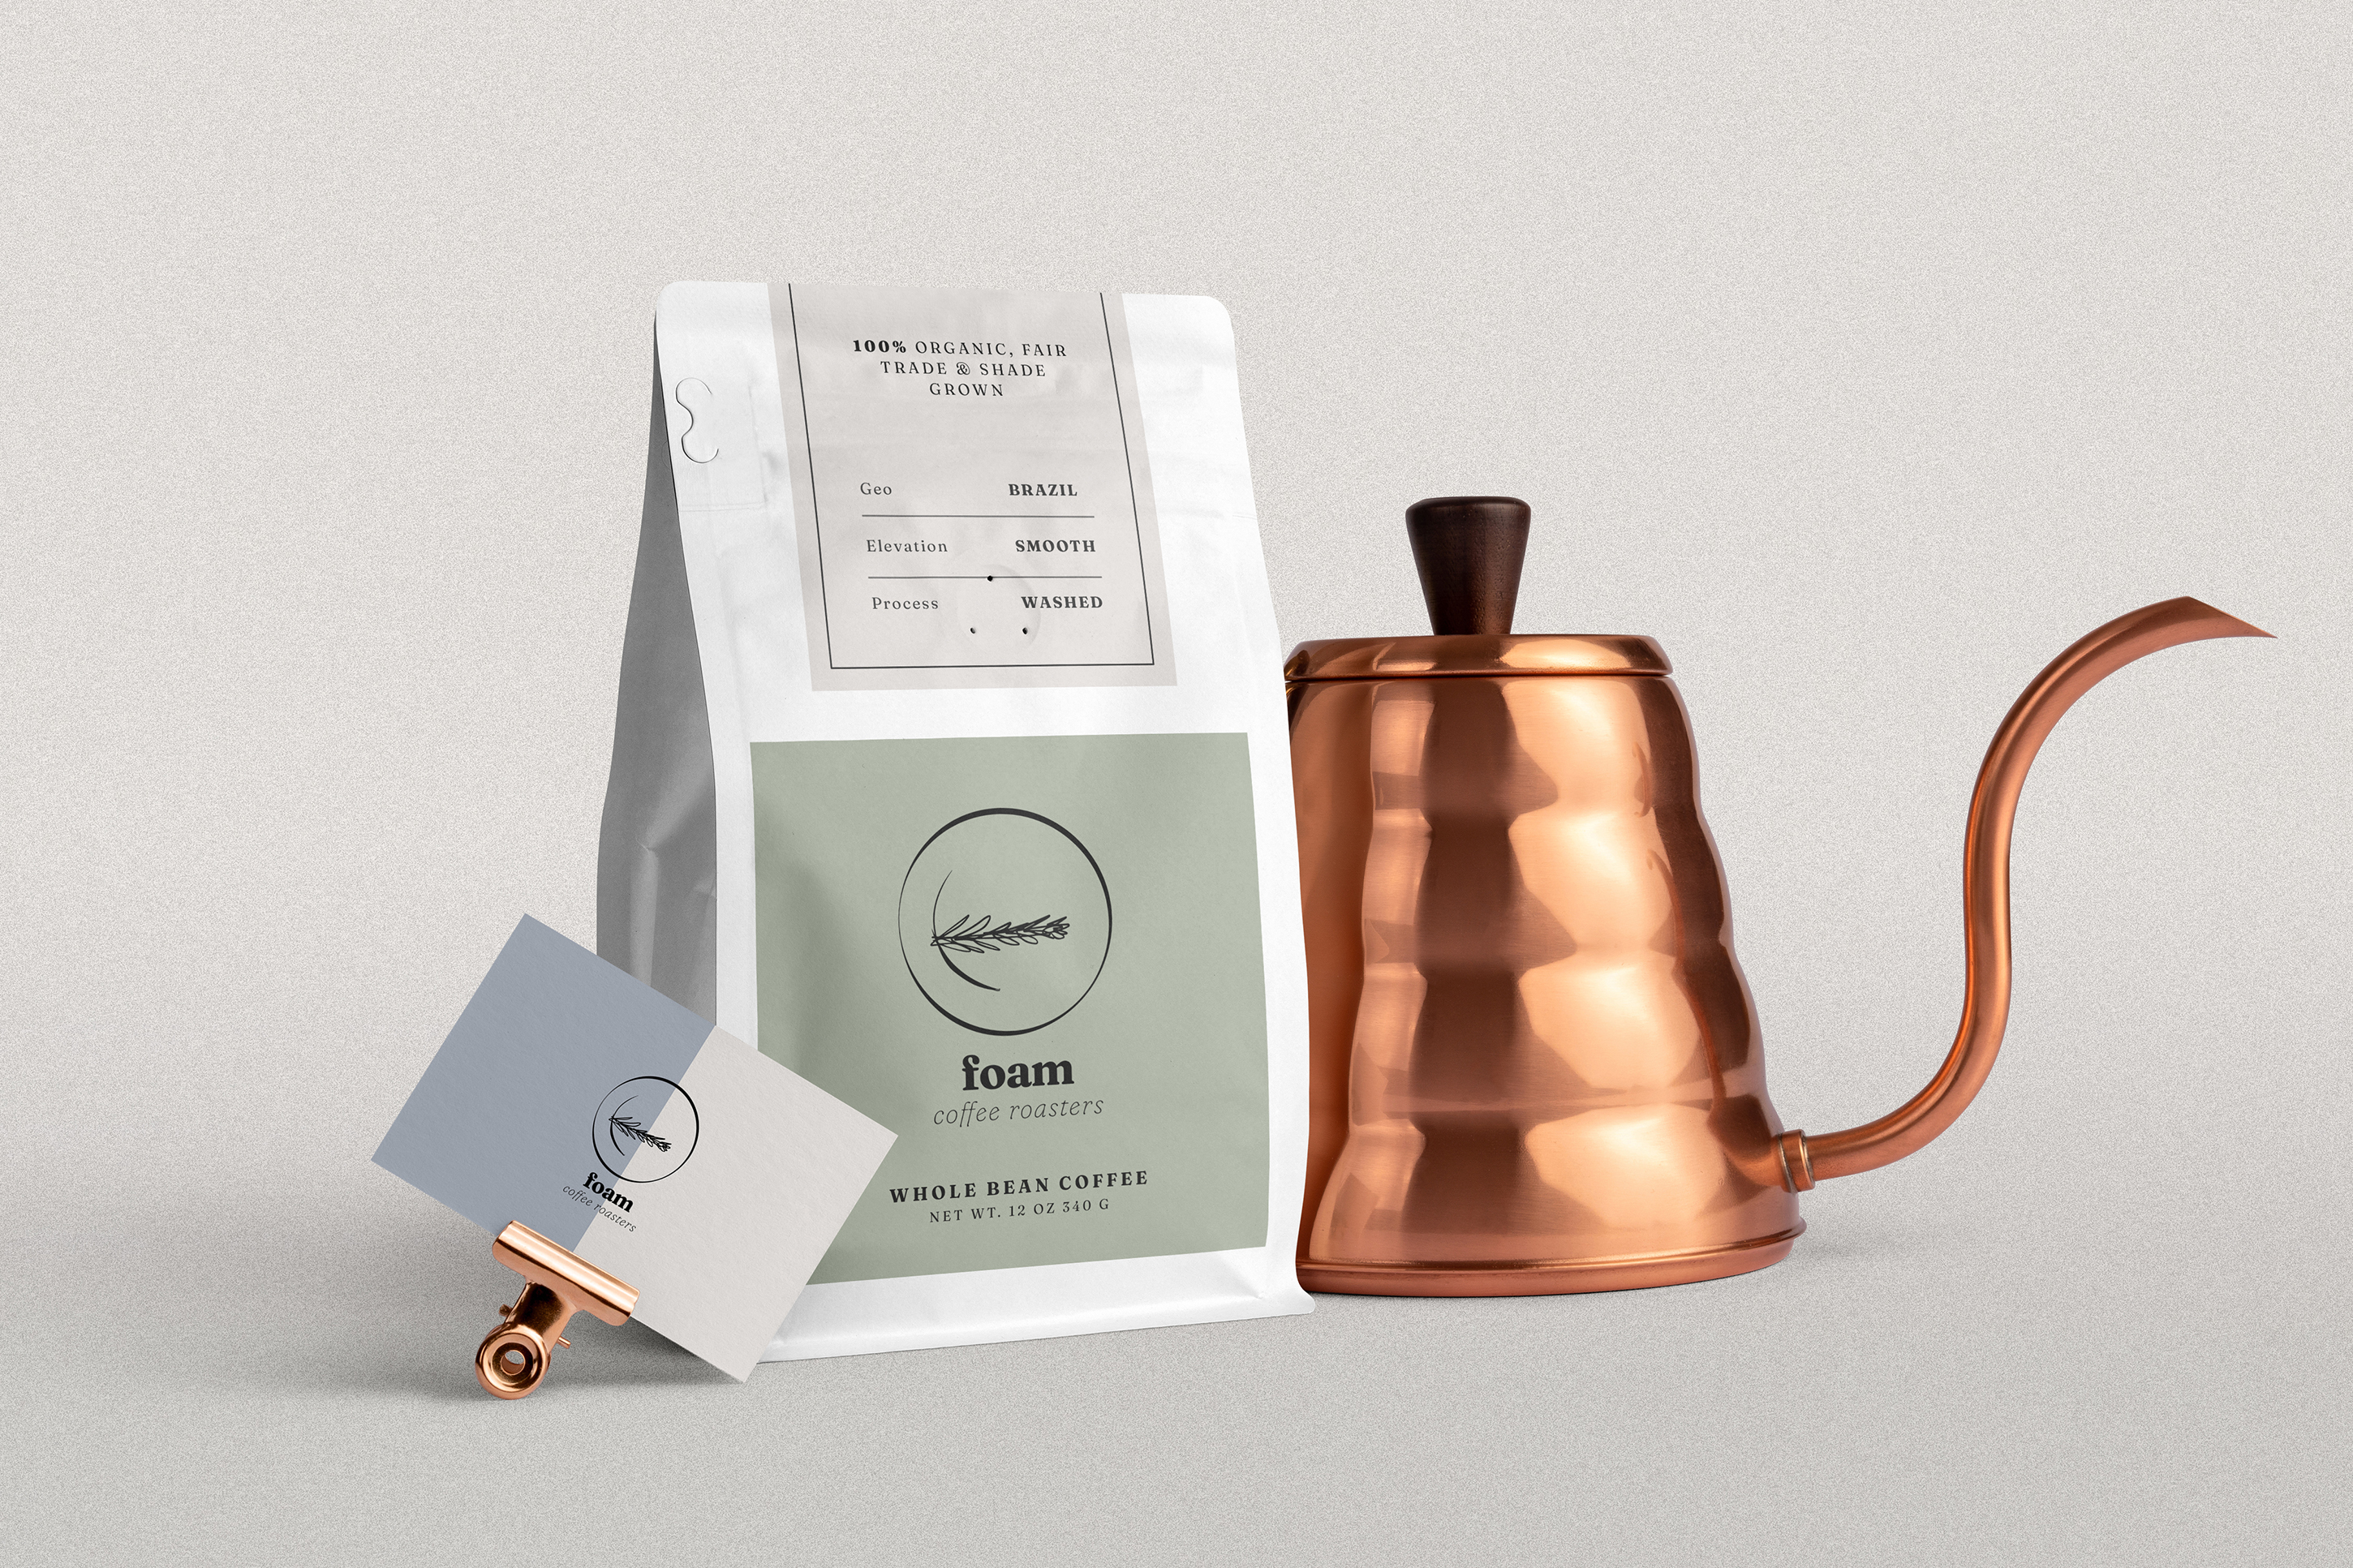 A Foam coffee bag surrounded by a Foam business card and a rose gold pour-over coffee kettle